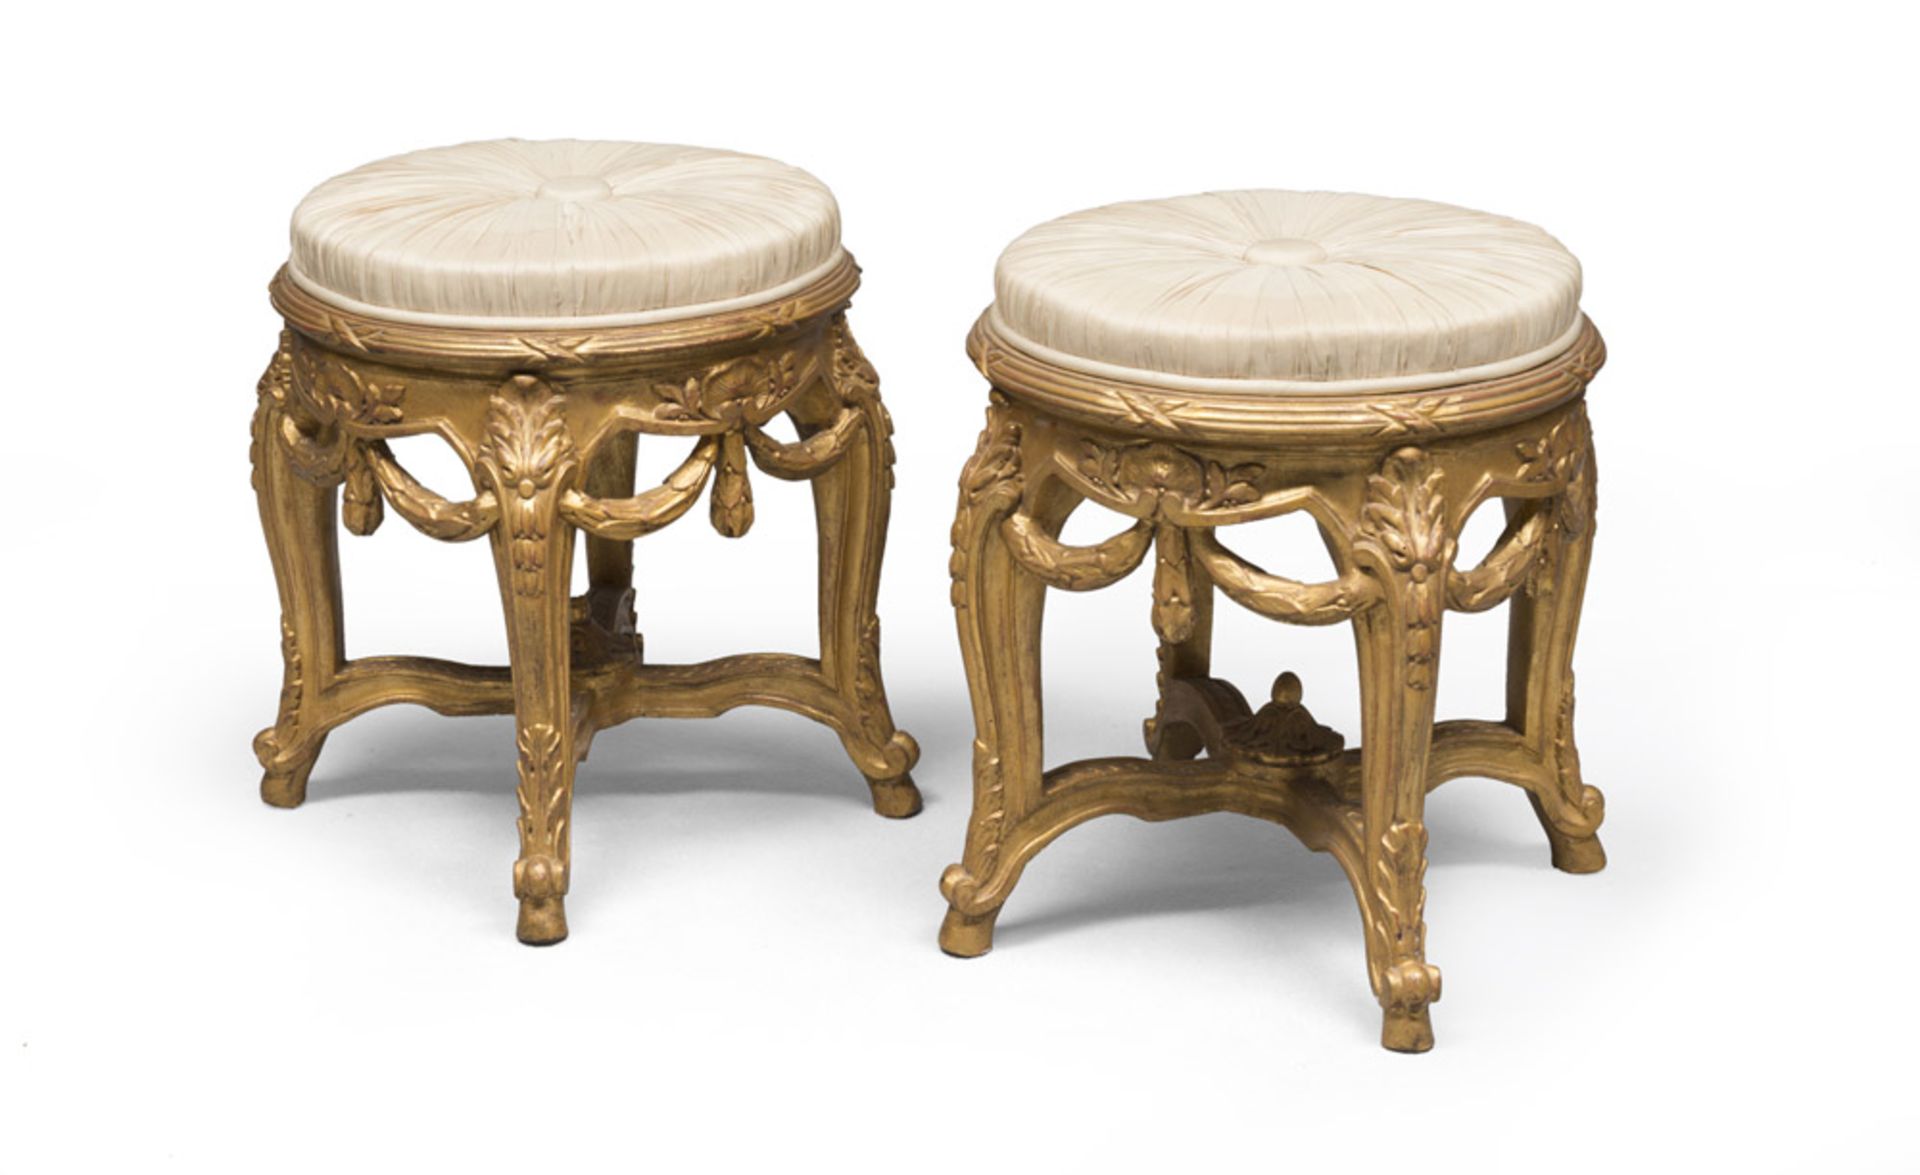 A pair of gilded wood stools with white satin seats, probably France 18th century. Measures cm. 55 x